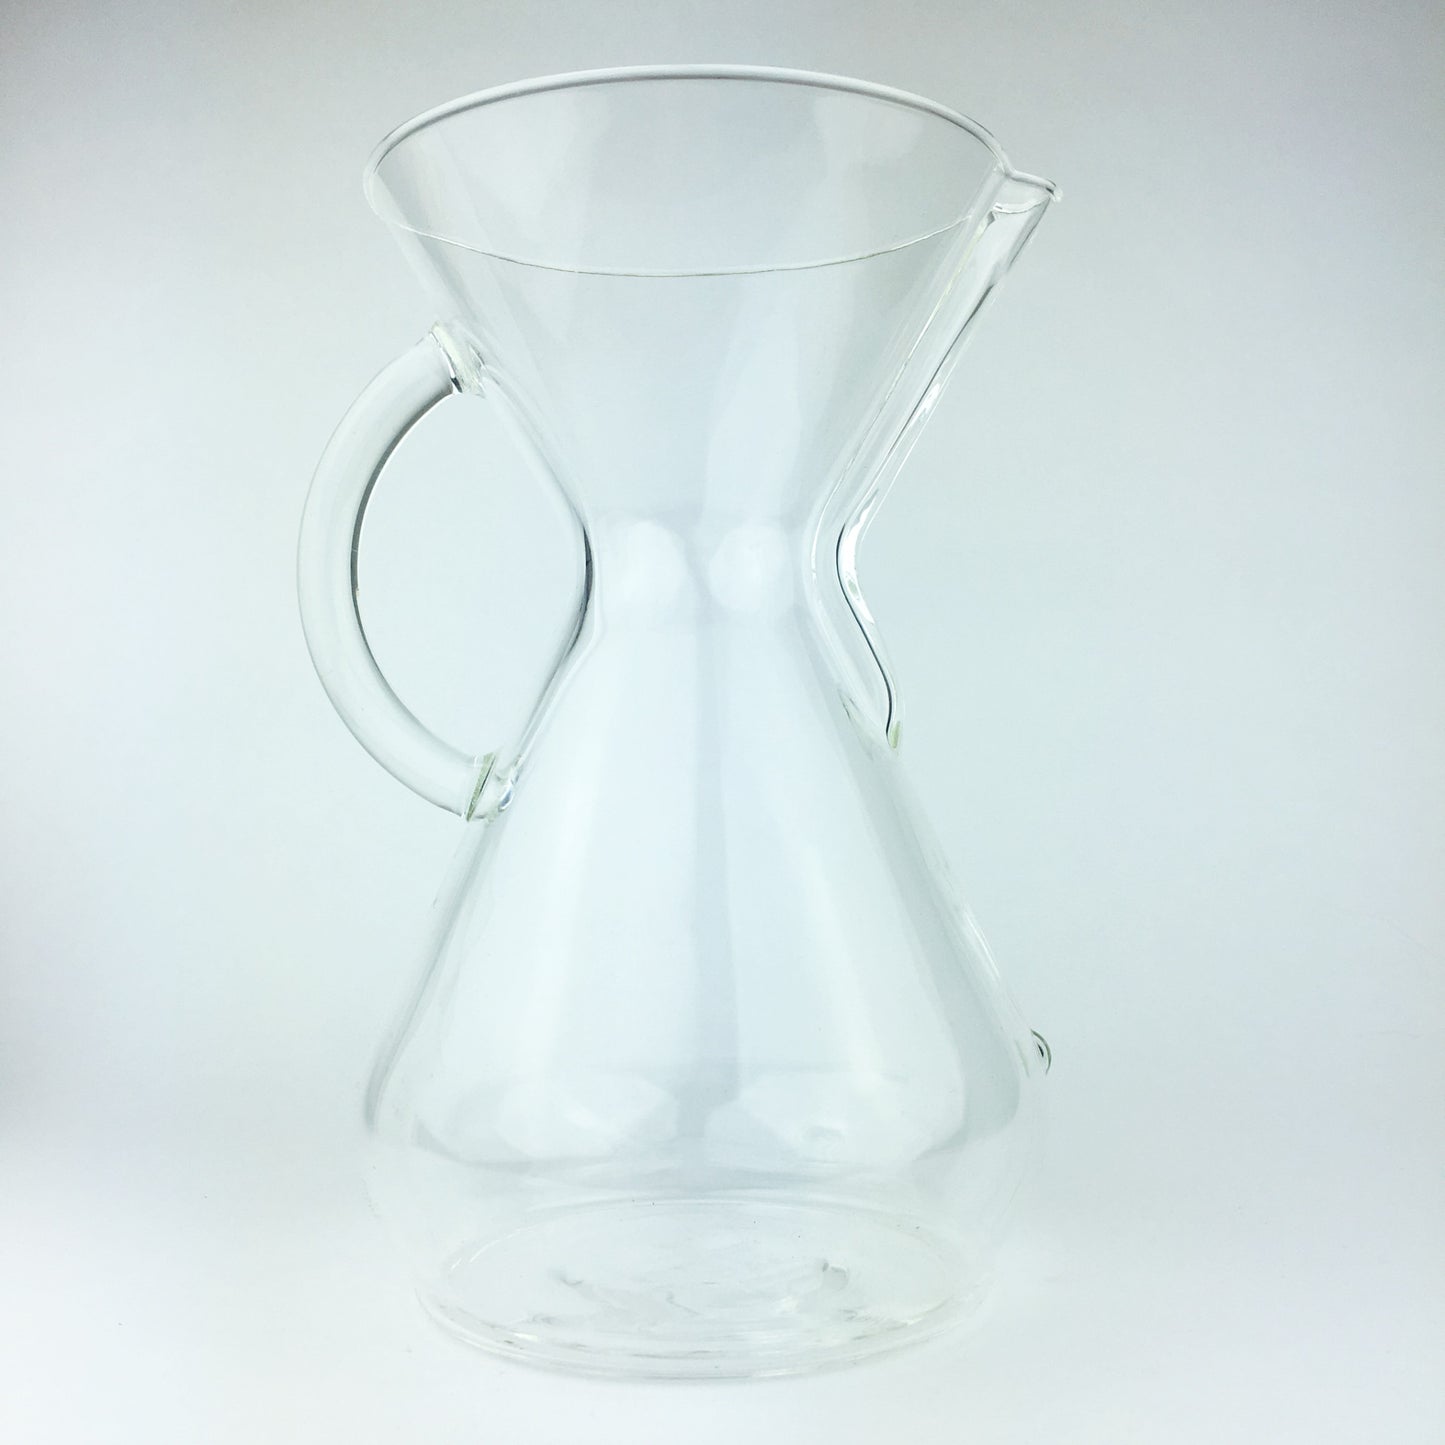 Chemex Pour-Over Coffee Maker - 10 Cup